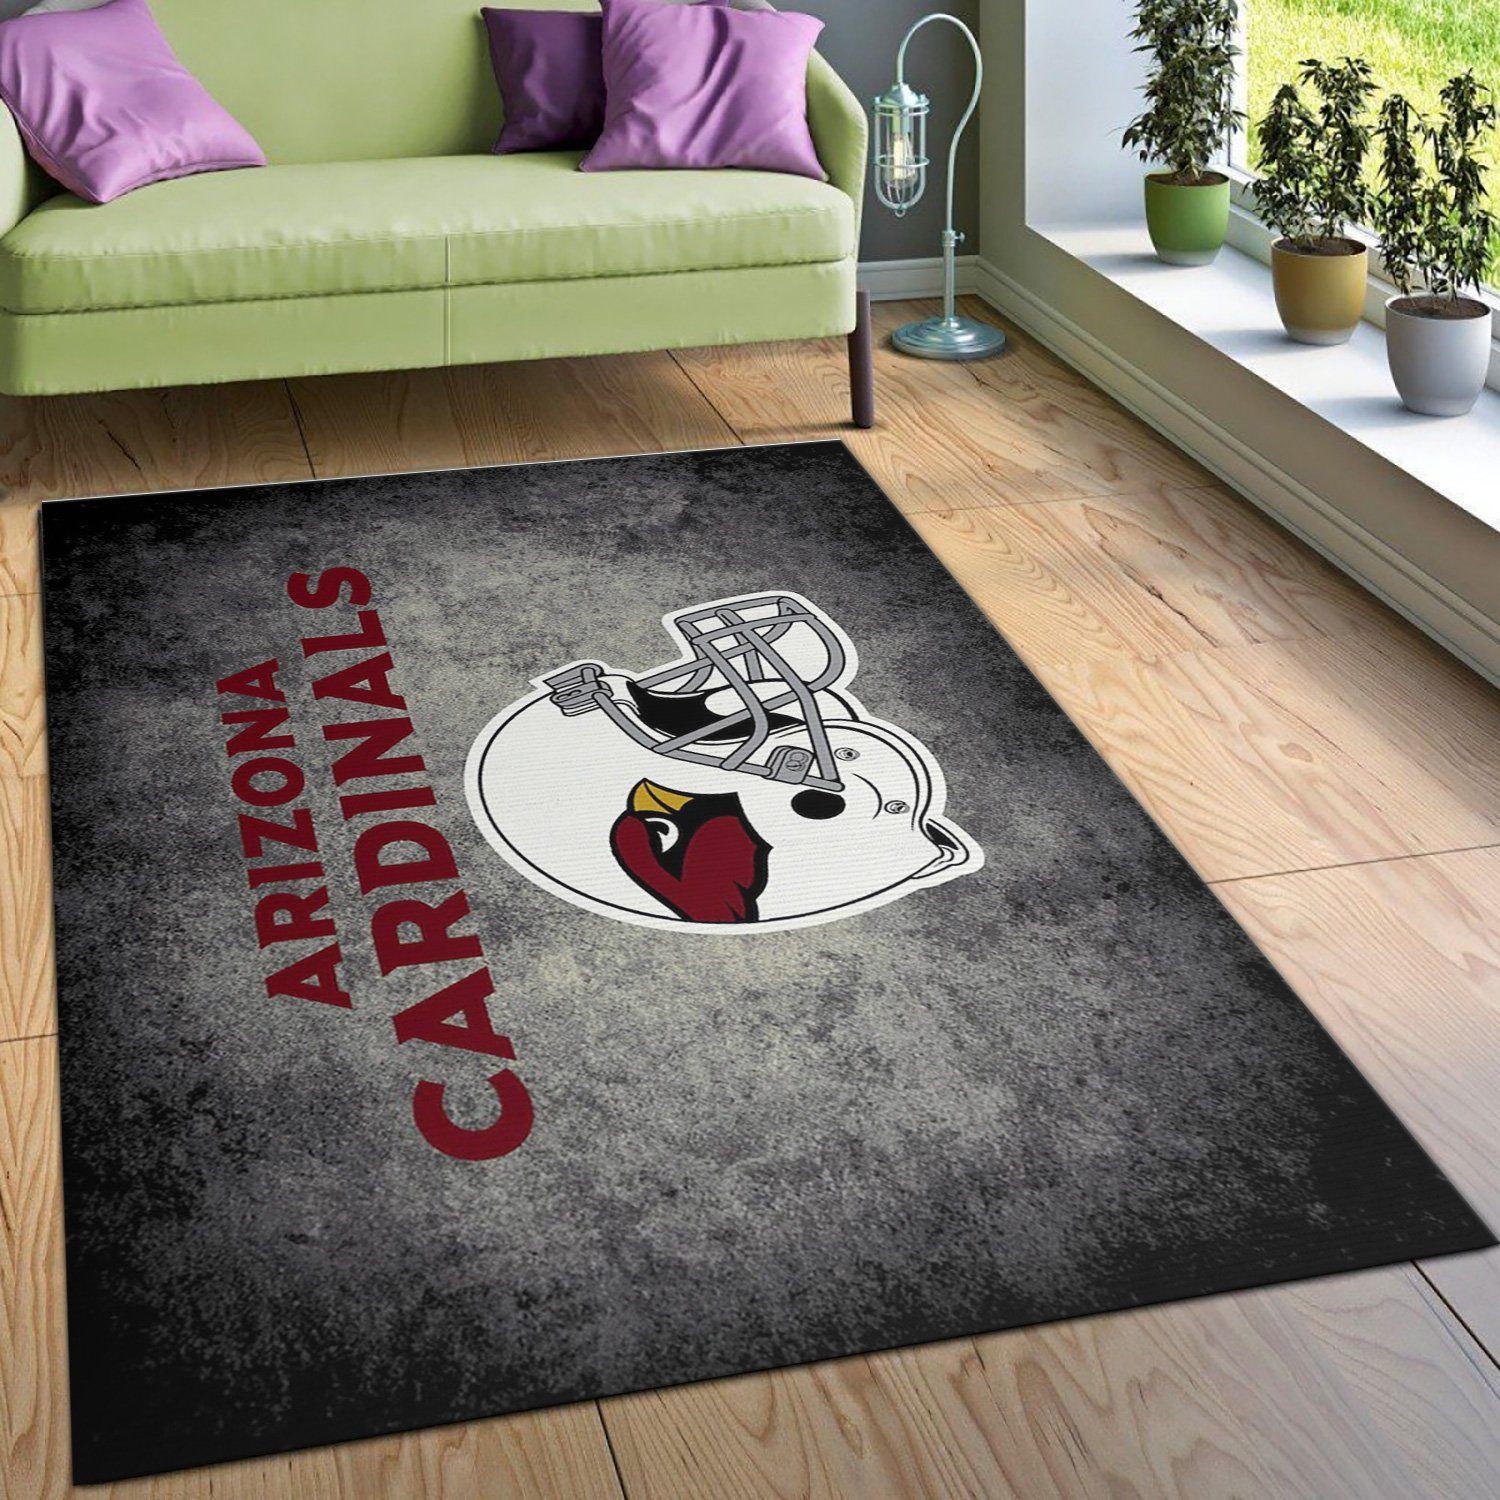 Arizona Cardinals Imperial Distressed Rug NFL Team Logos Area Rug, Living room and bedroom Rug, US Gift Decor - Indoor Outdoor Rugs 3